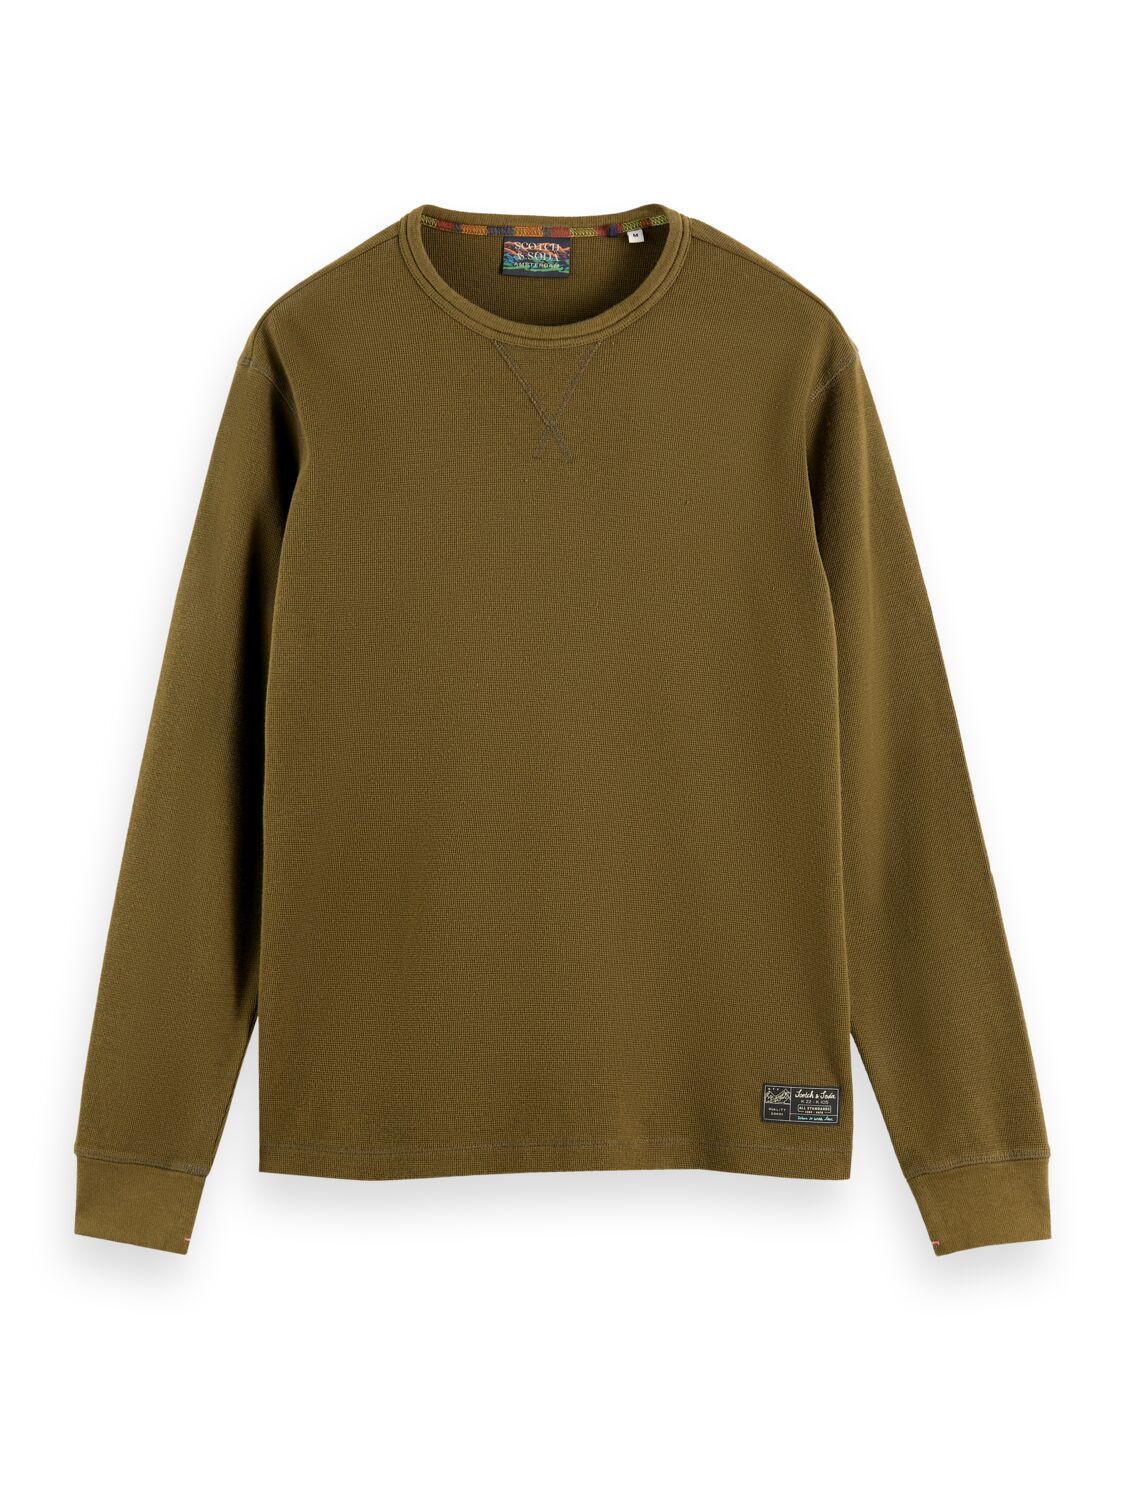 Scotch and Soda Structured Waffle Long Sleeve Tee - Military